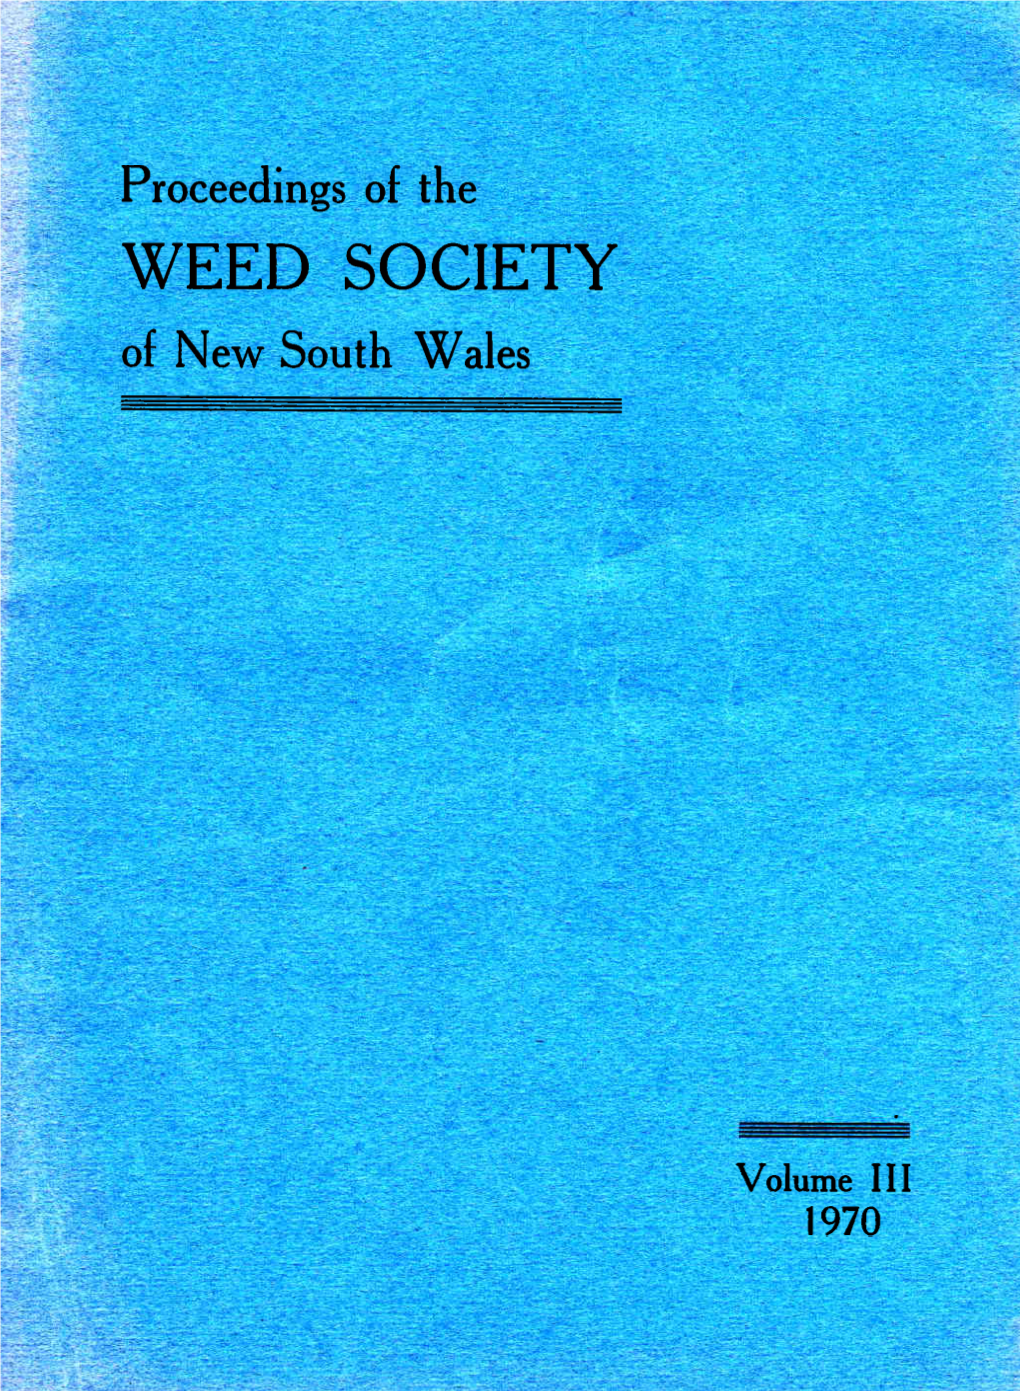 NSW Weed Society